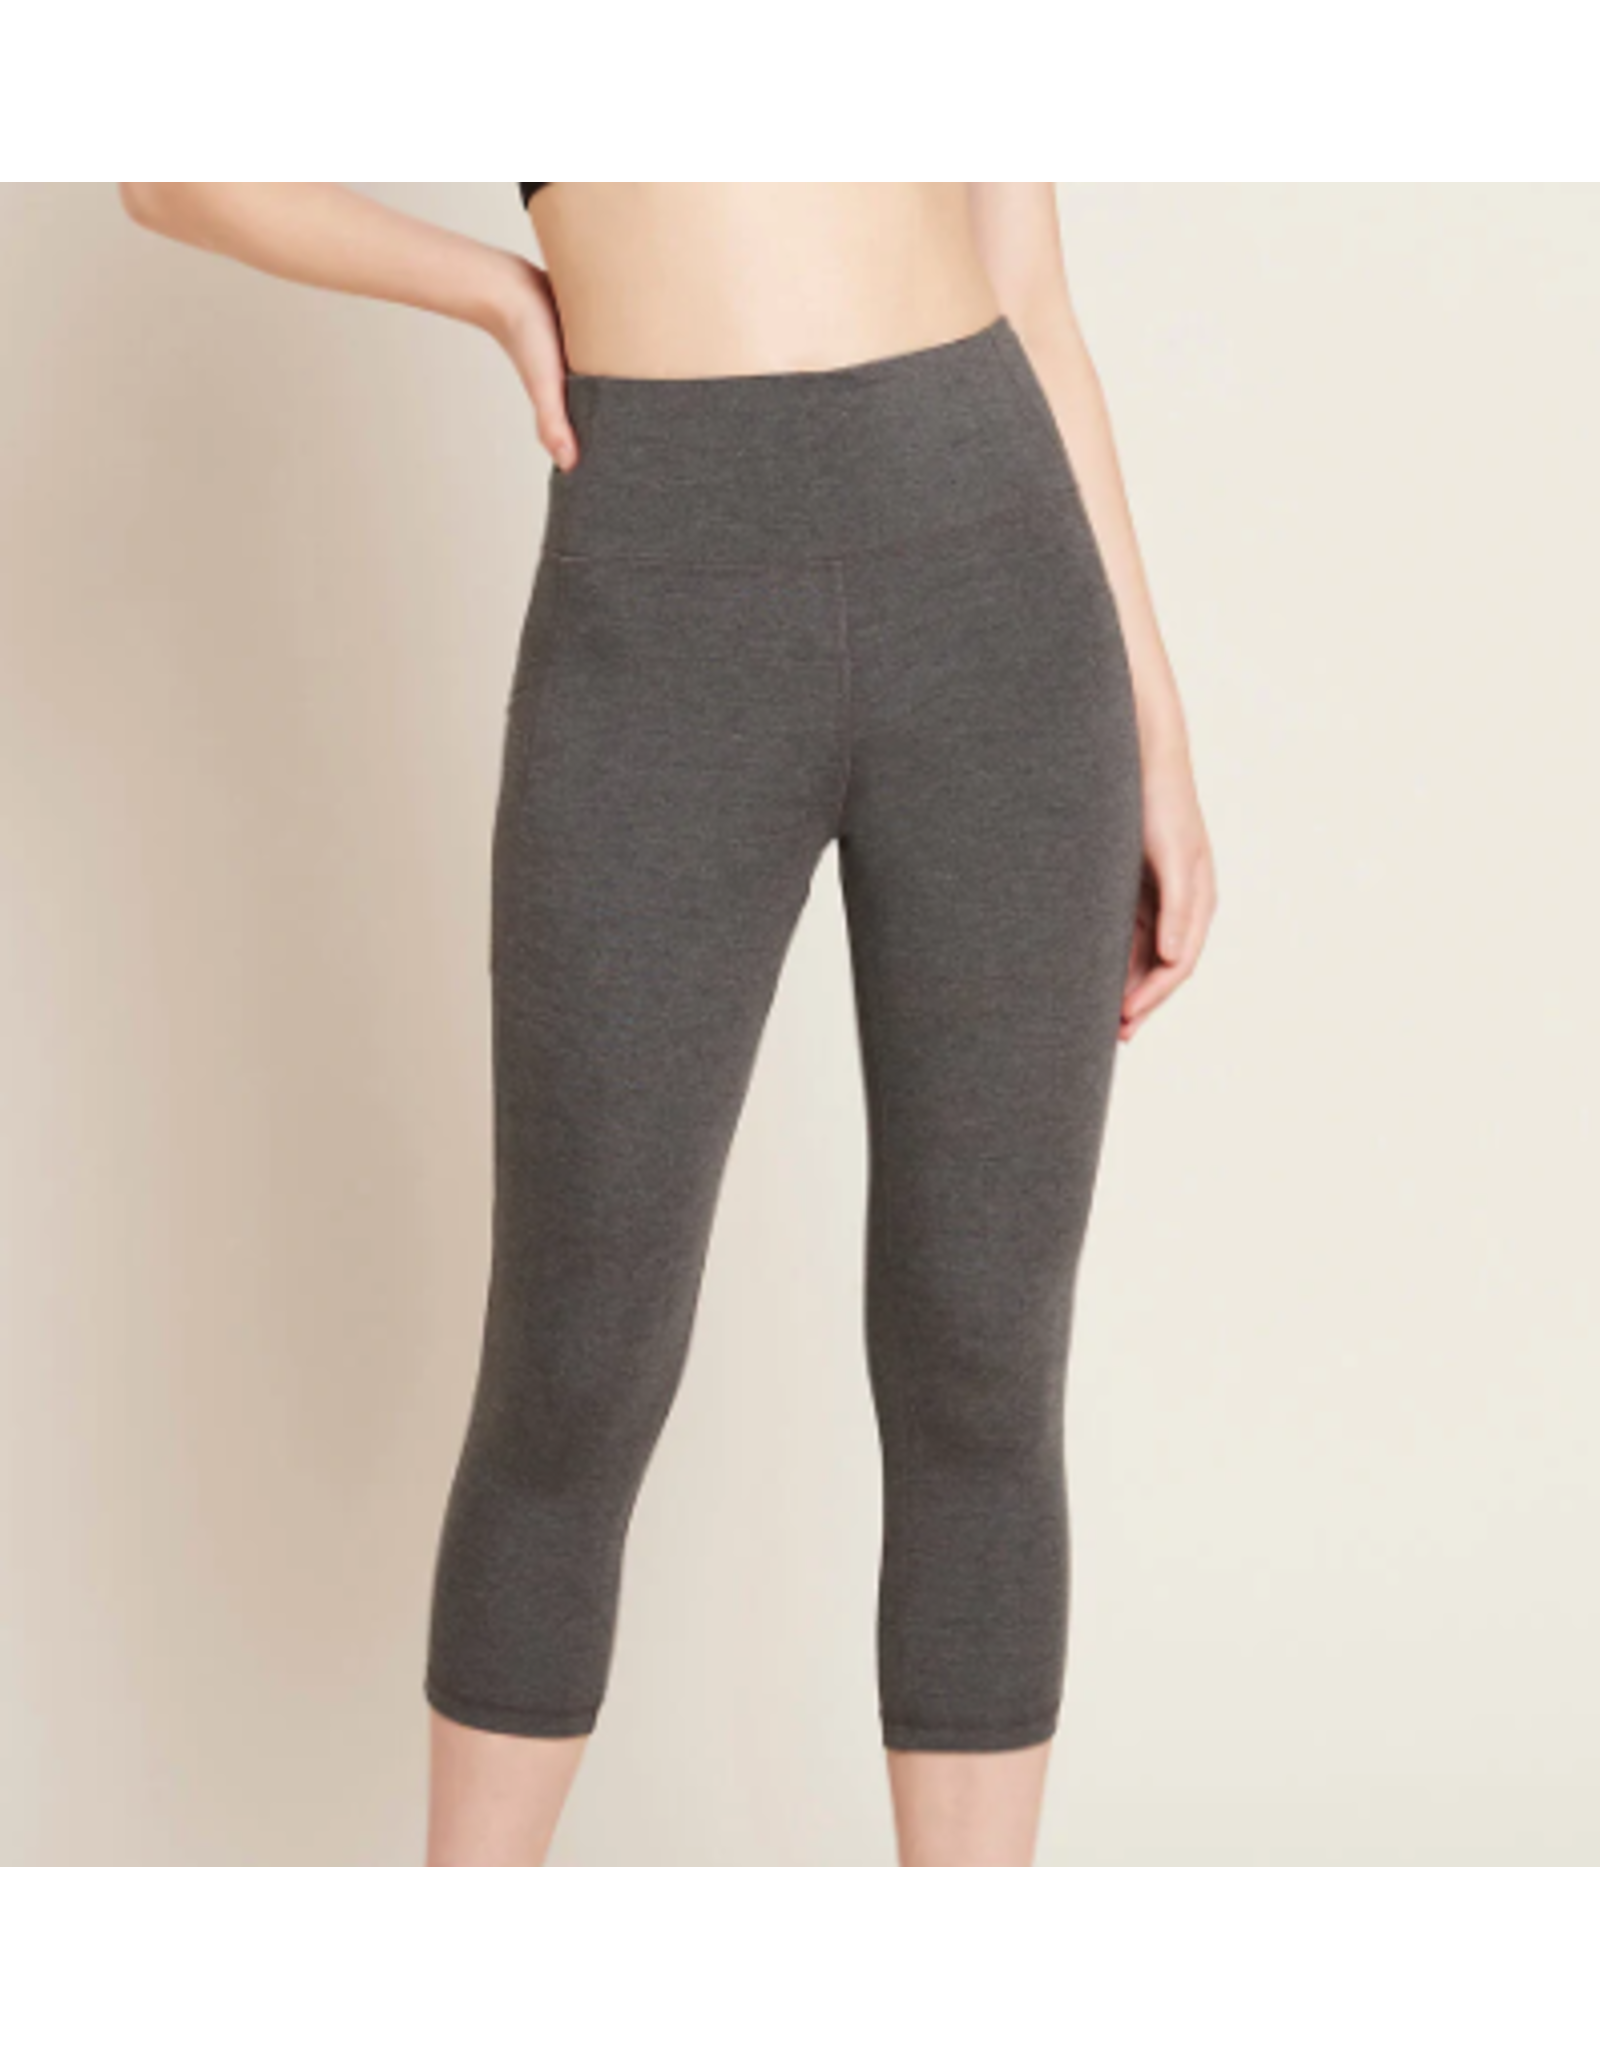 Boody Boody Active High Waist 3/4 Legging with Pockets